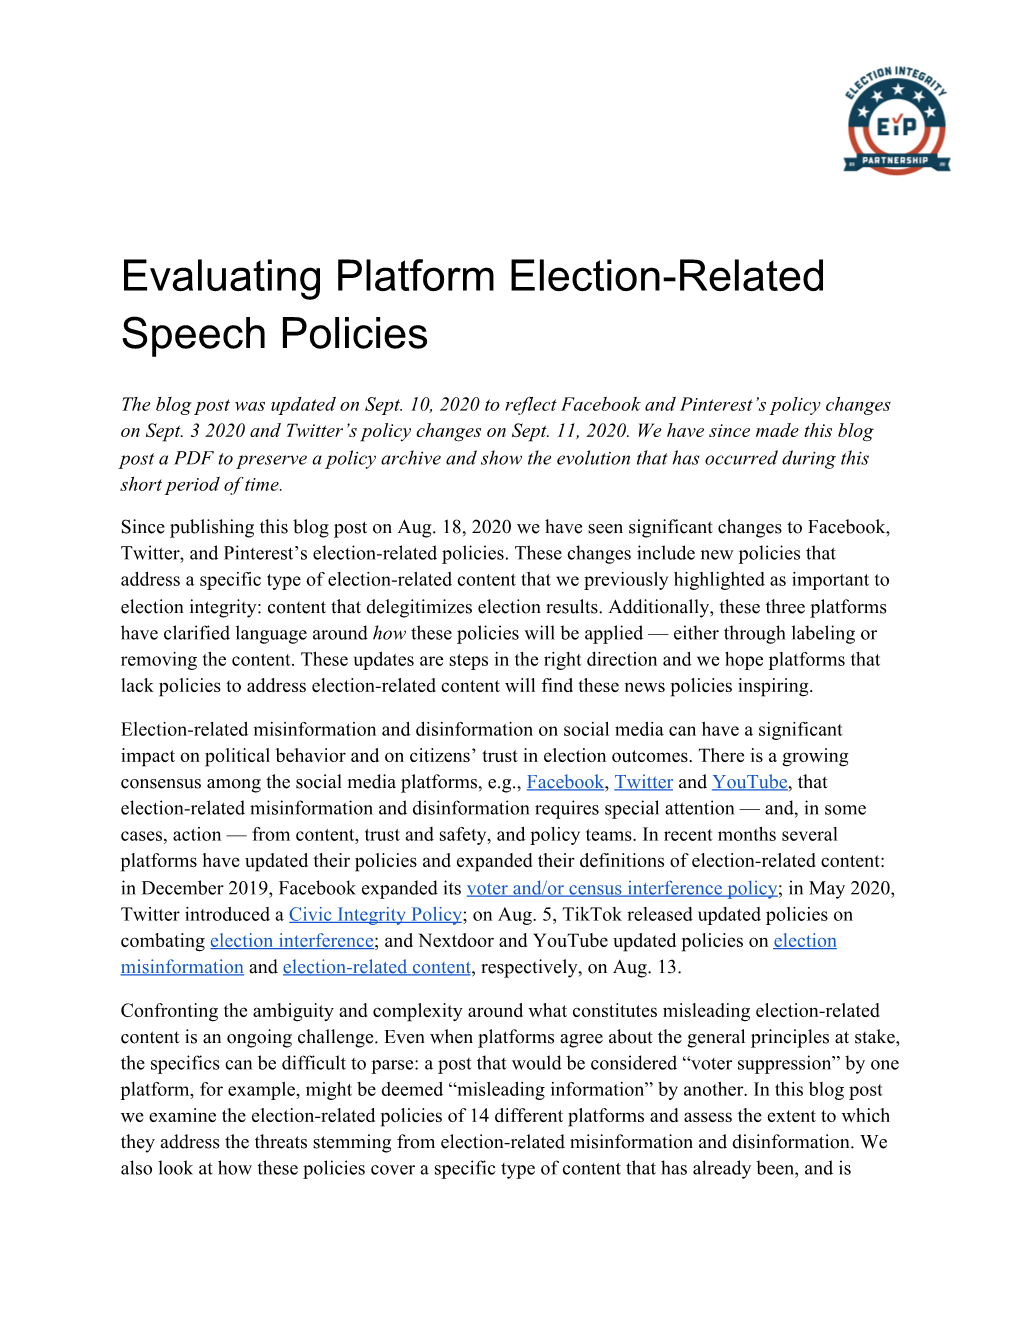 Evaluating Platform Election-Related Speech Policies